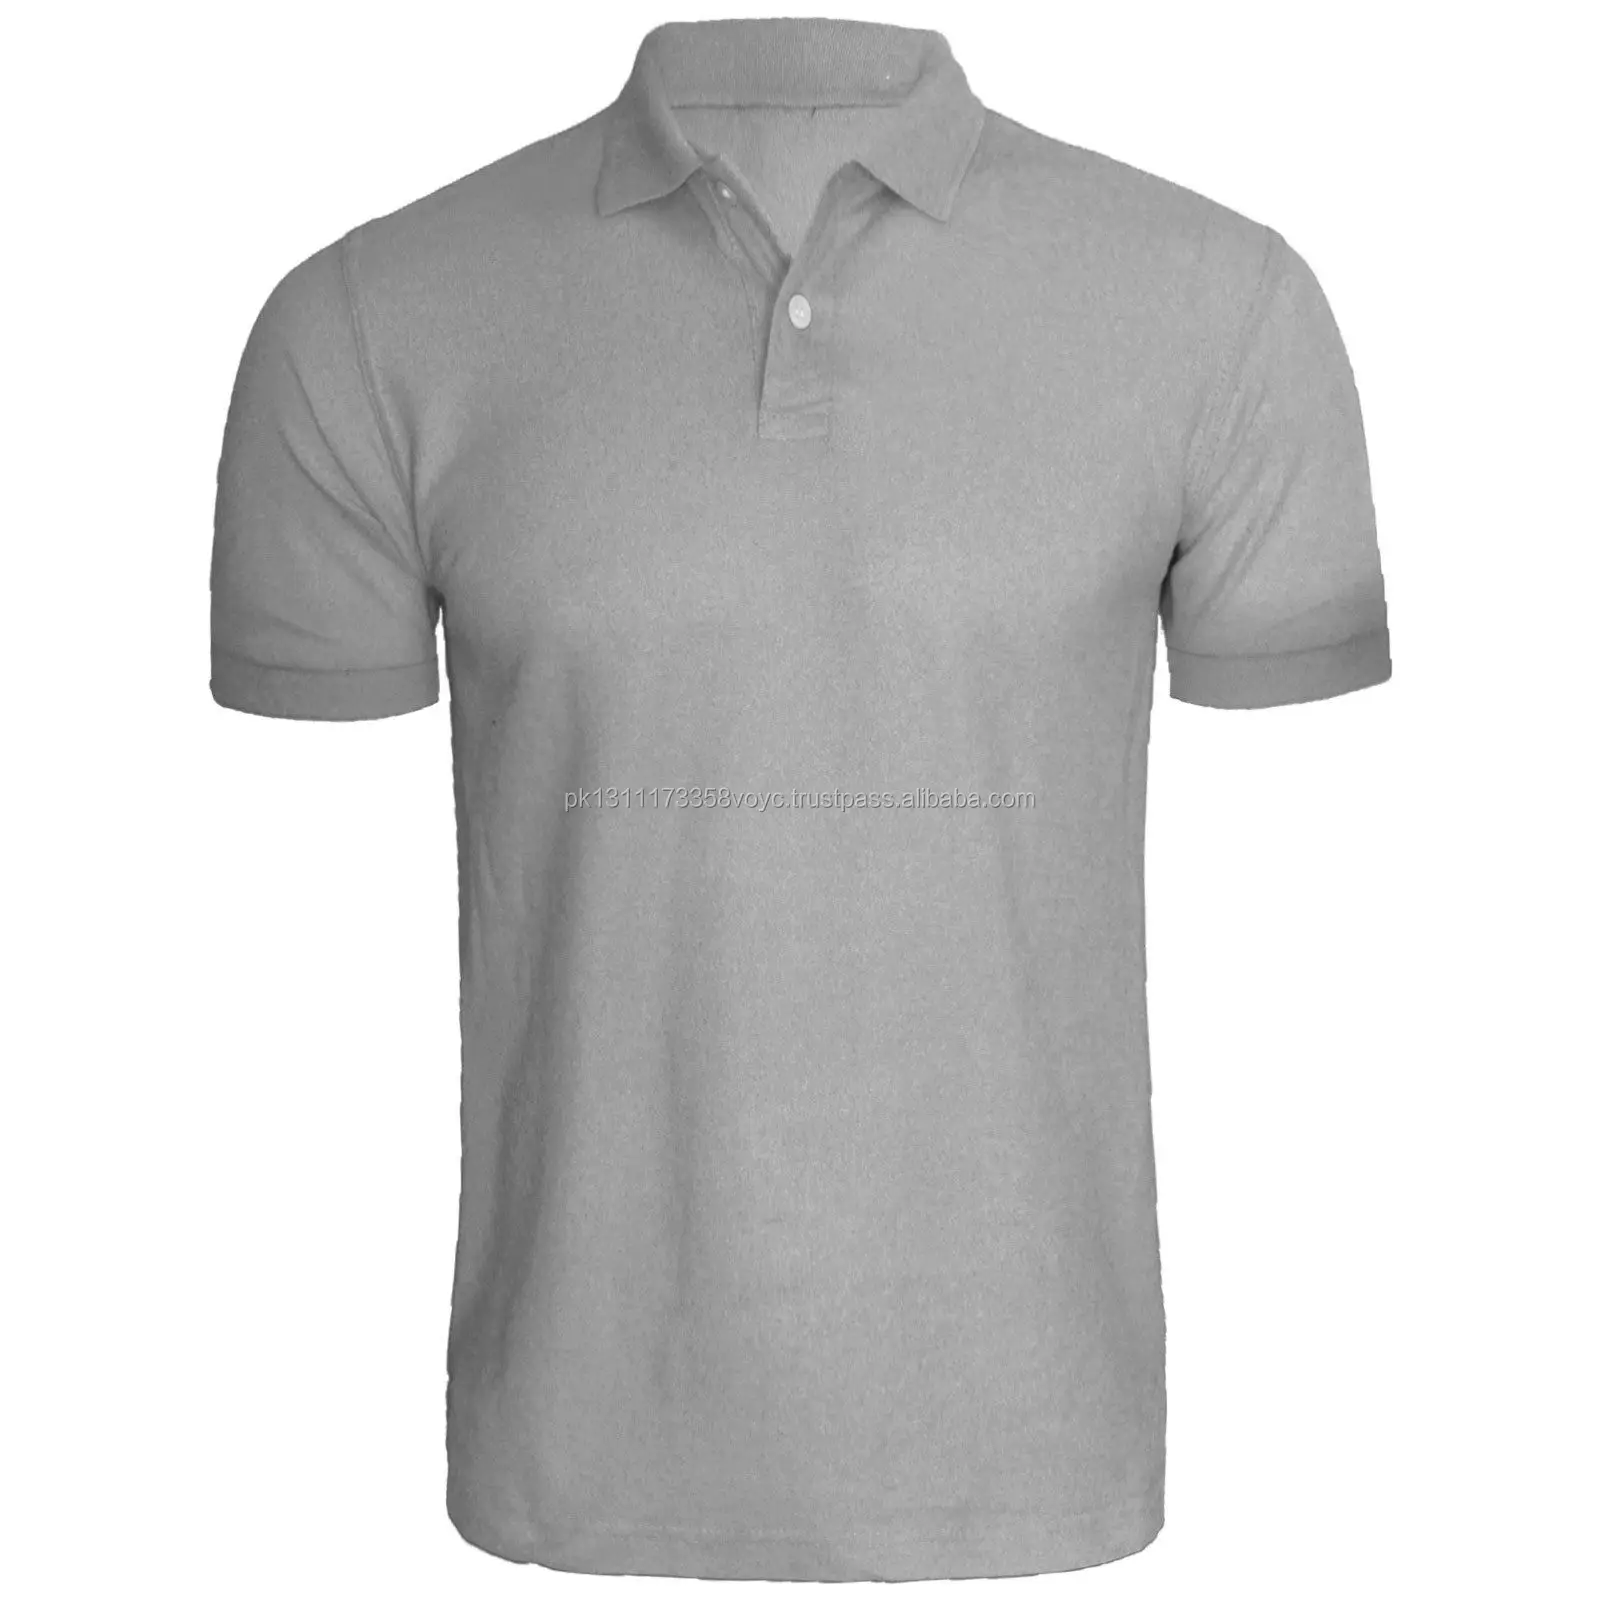 Men's High Quality Polo Shirts Cotton+ Polyester Polo Shirts,Made In ...